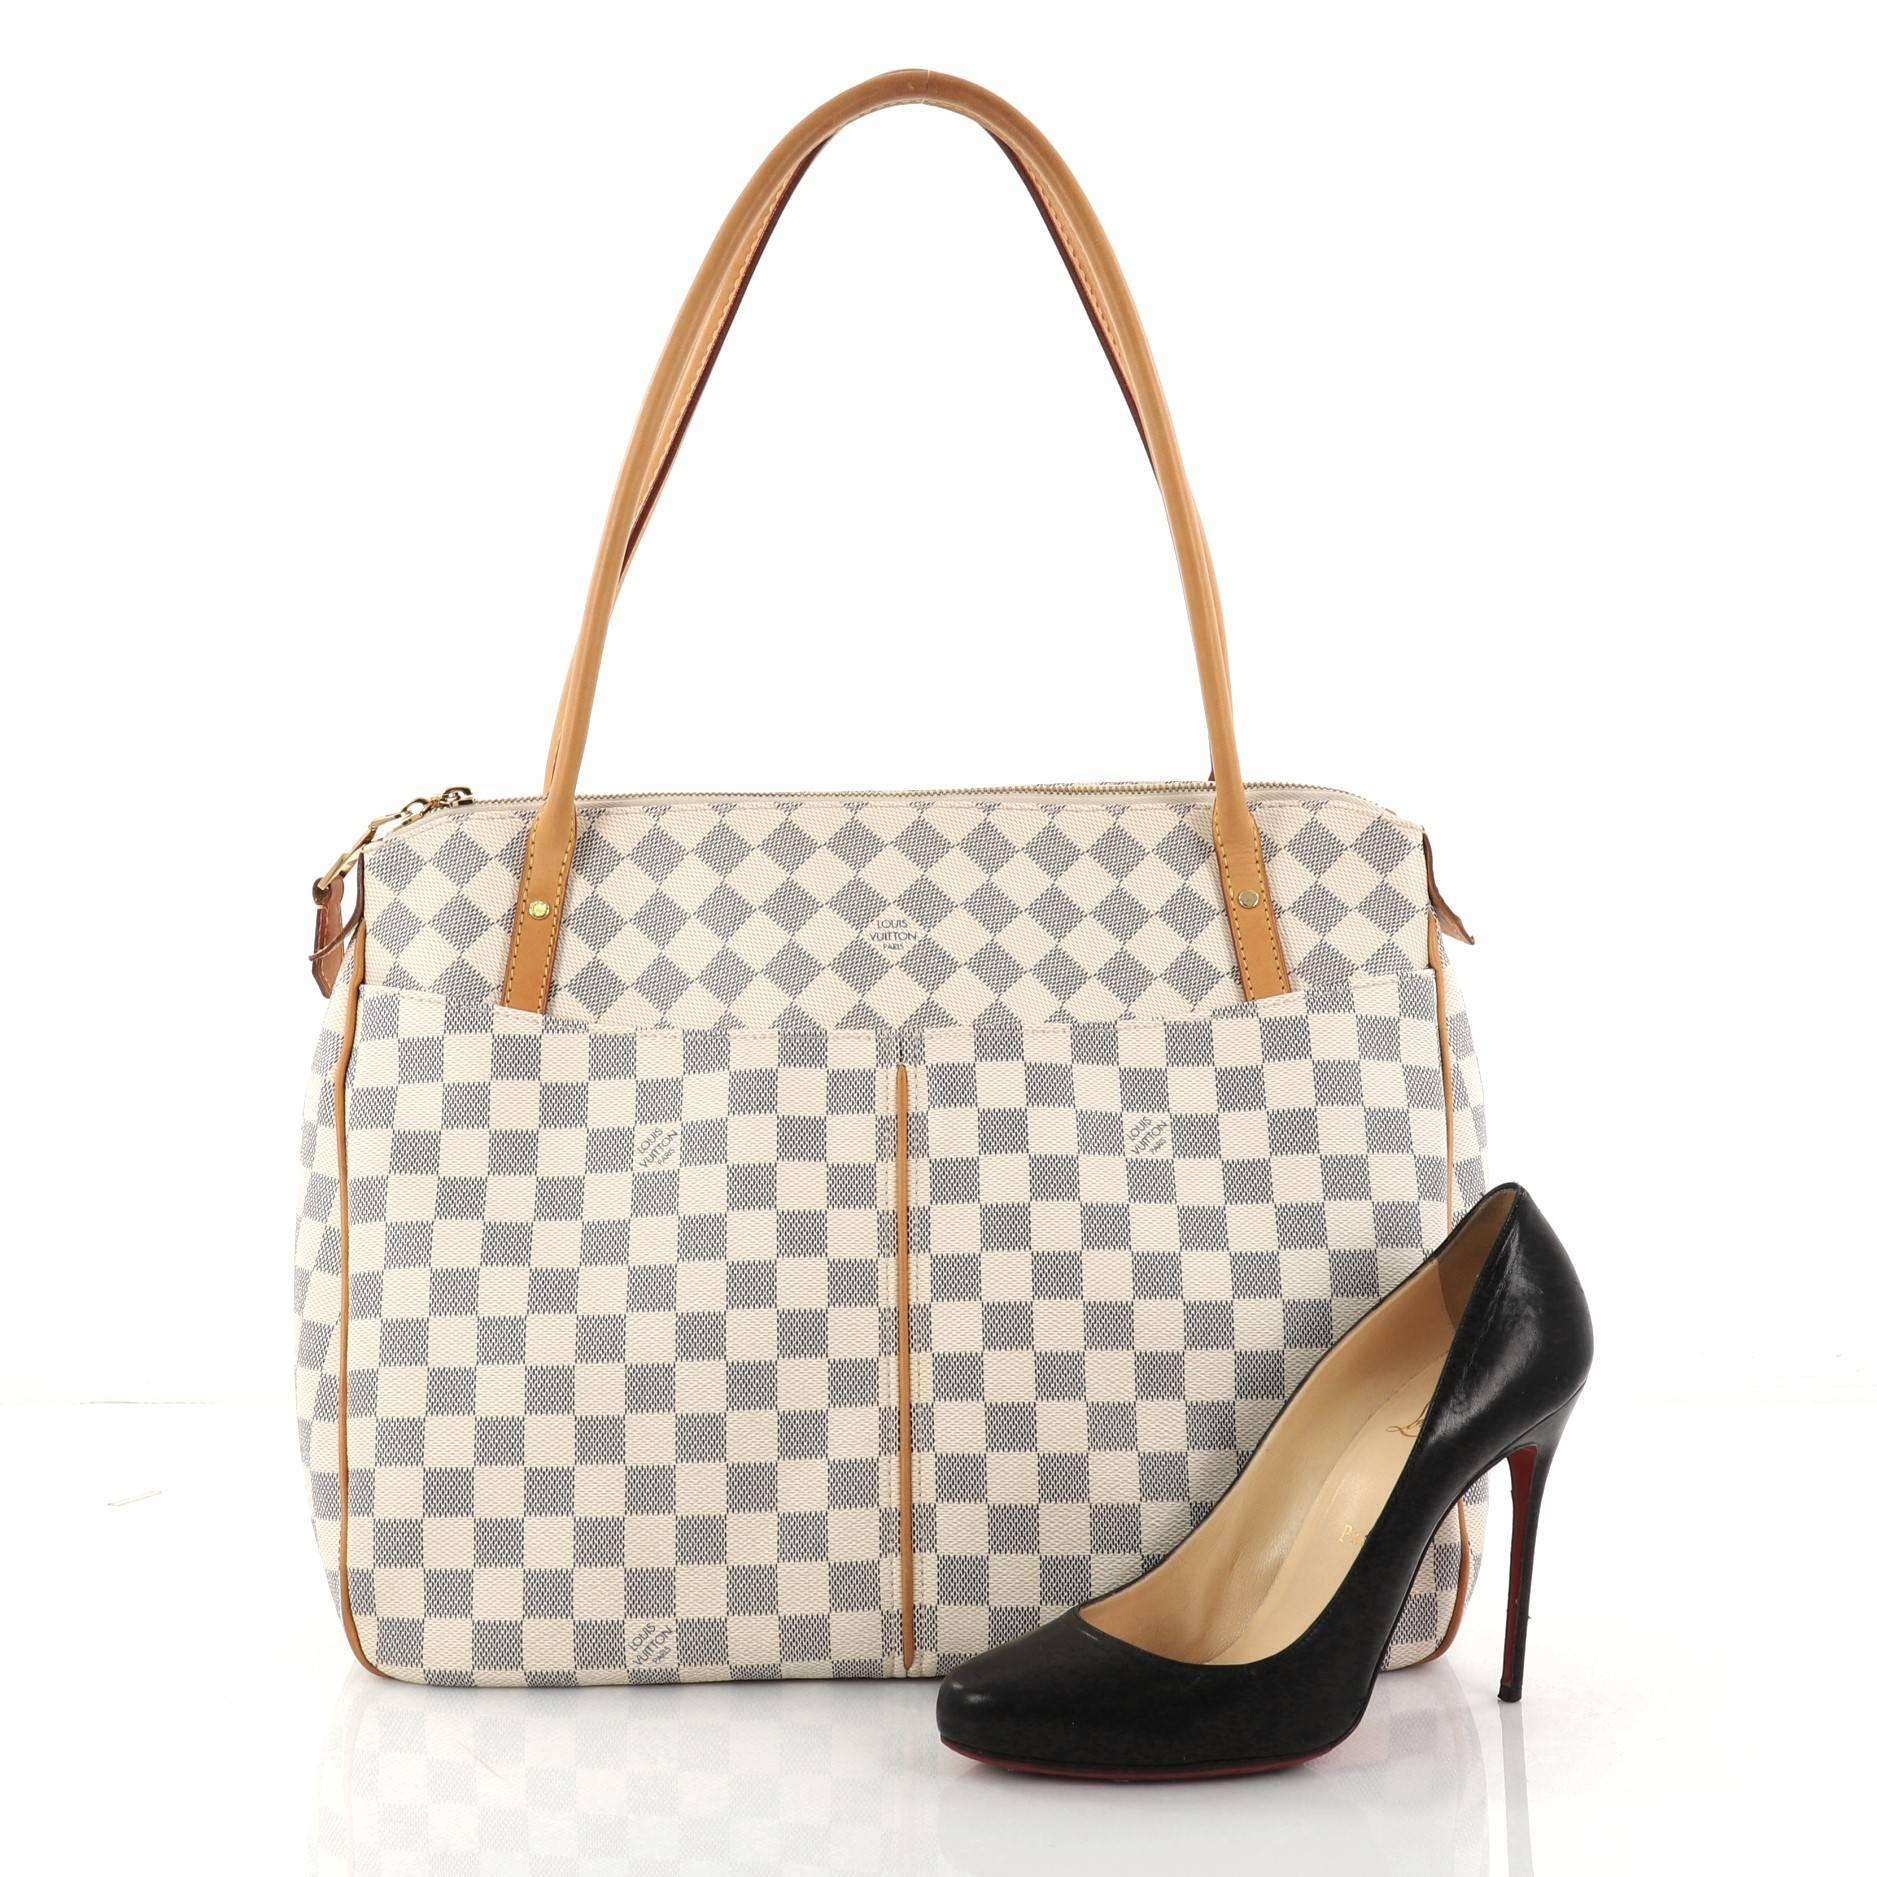 This authentic Louis Vuitton Figheri Handbag Damier GM is a modern yet elegant accessory made for everyday excursions. Crafted in popular damier azur coated canvas, this functional tote features long dual-rolled handles, vachetta leather trims,